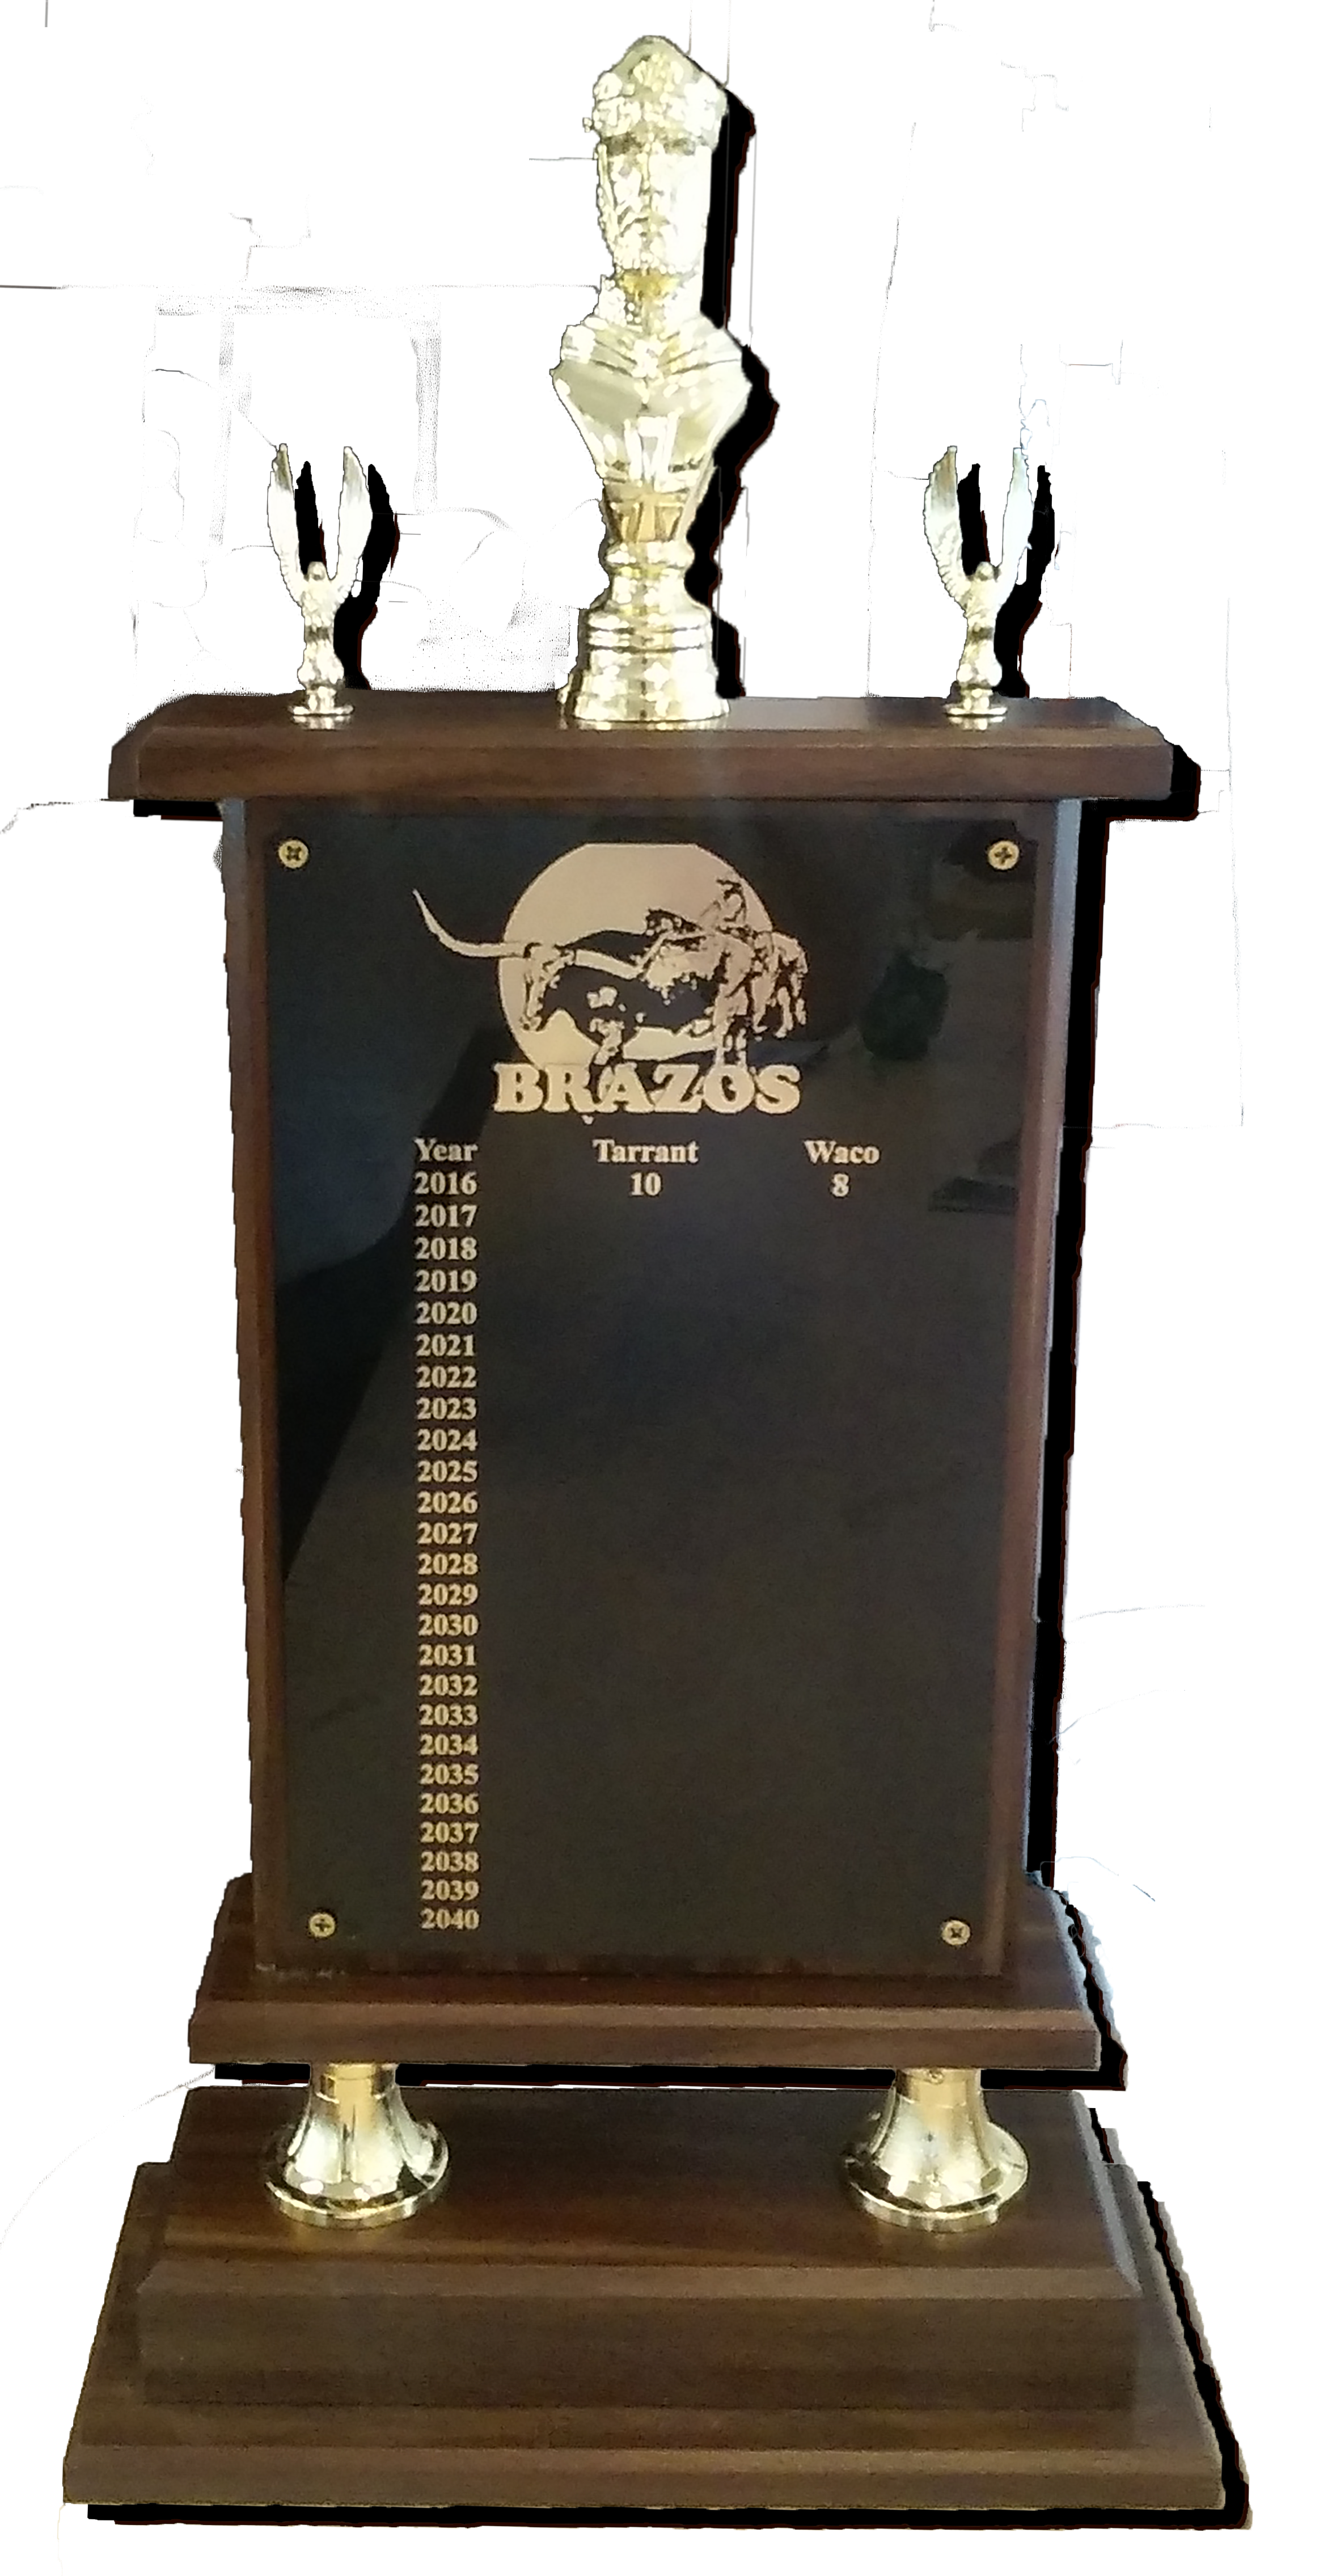 PHOTO OF BRAZOS TROPHY DONATED BY ANONYMOUS